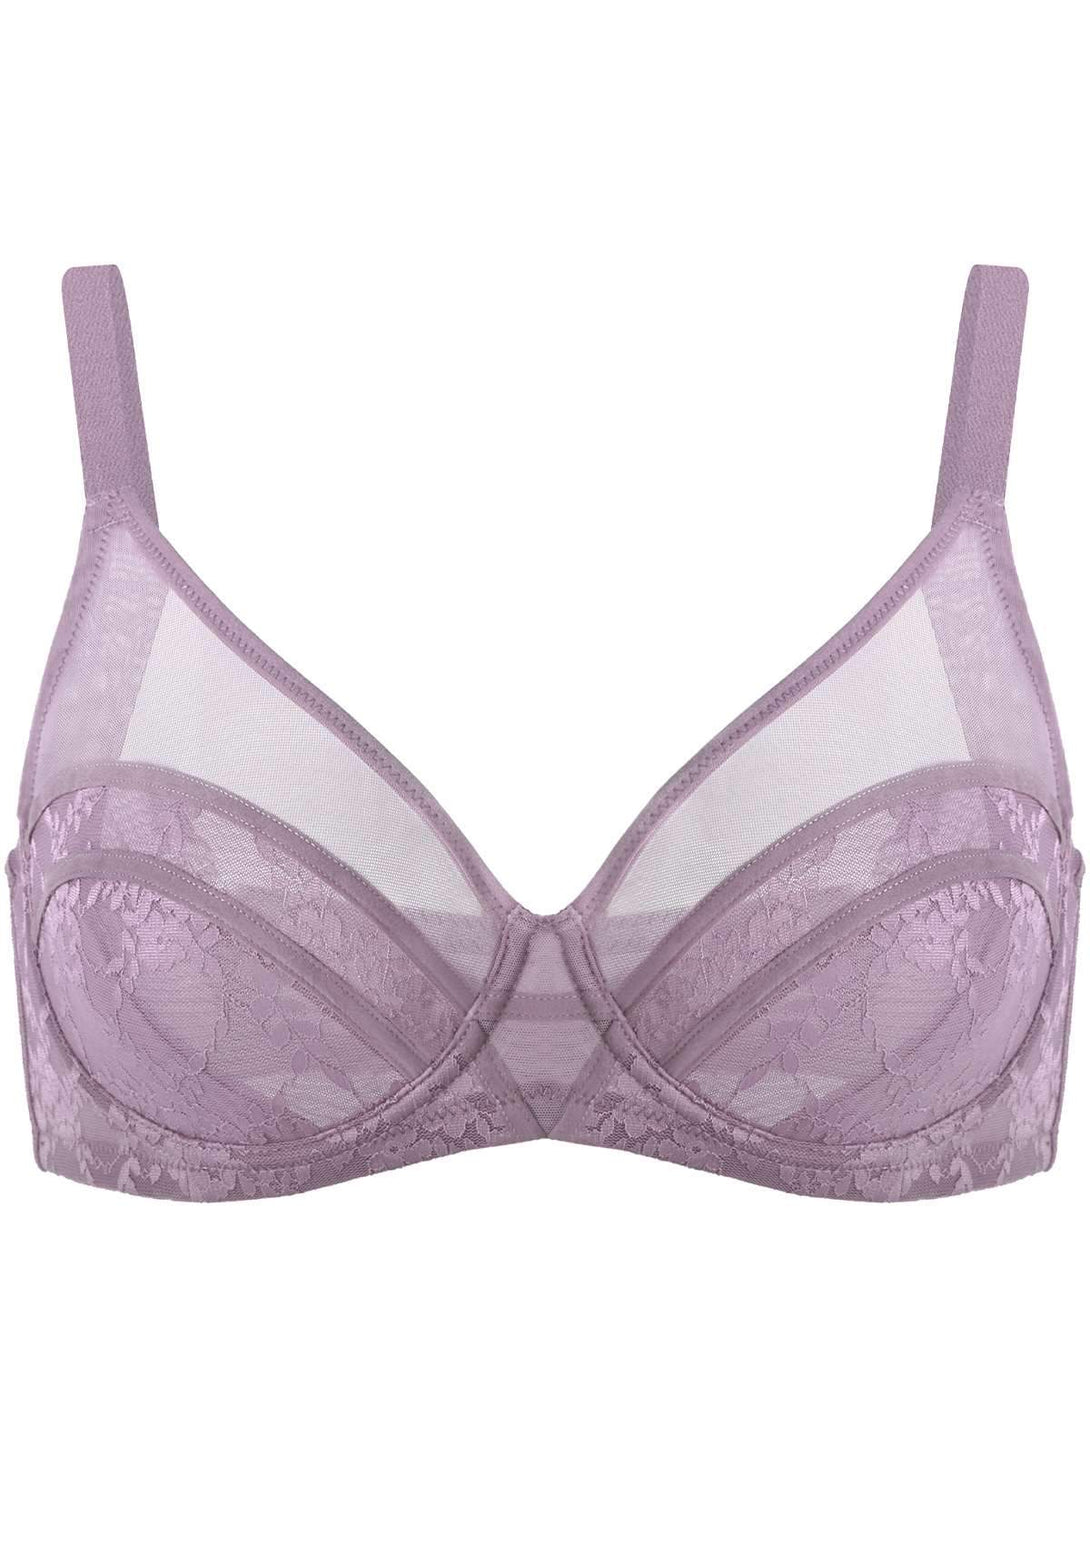 HSIA-EASTERBOGO Amour Sheer Lace Unlined Bra